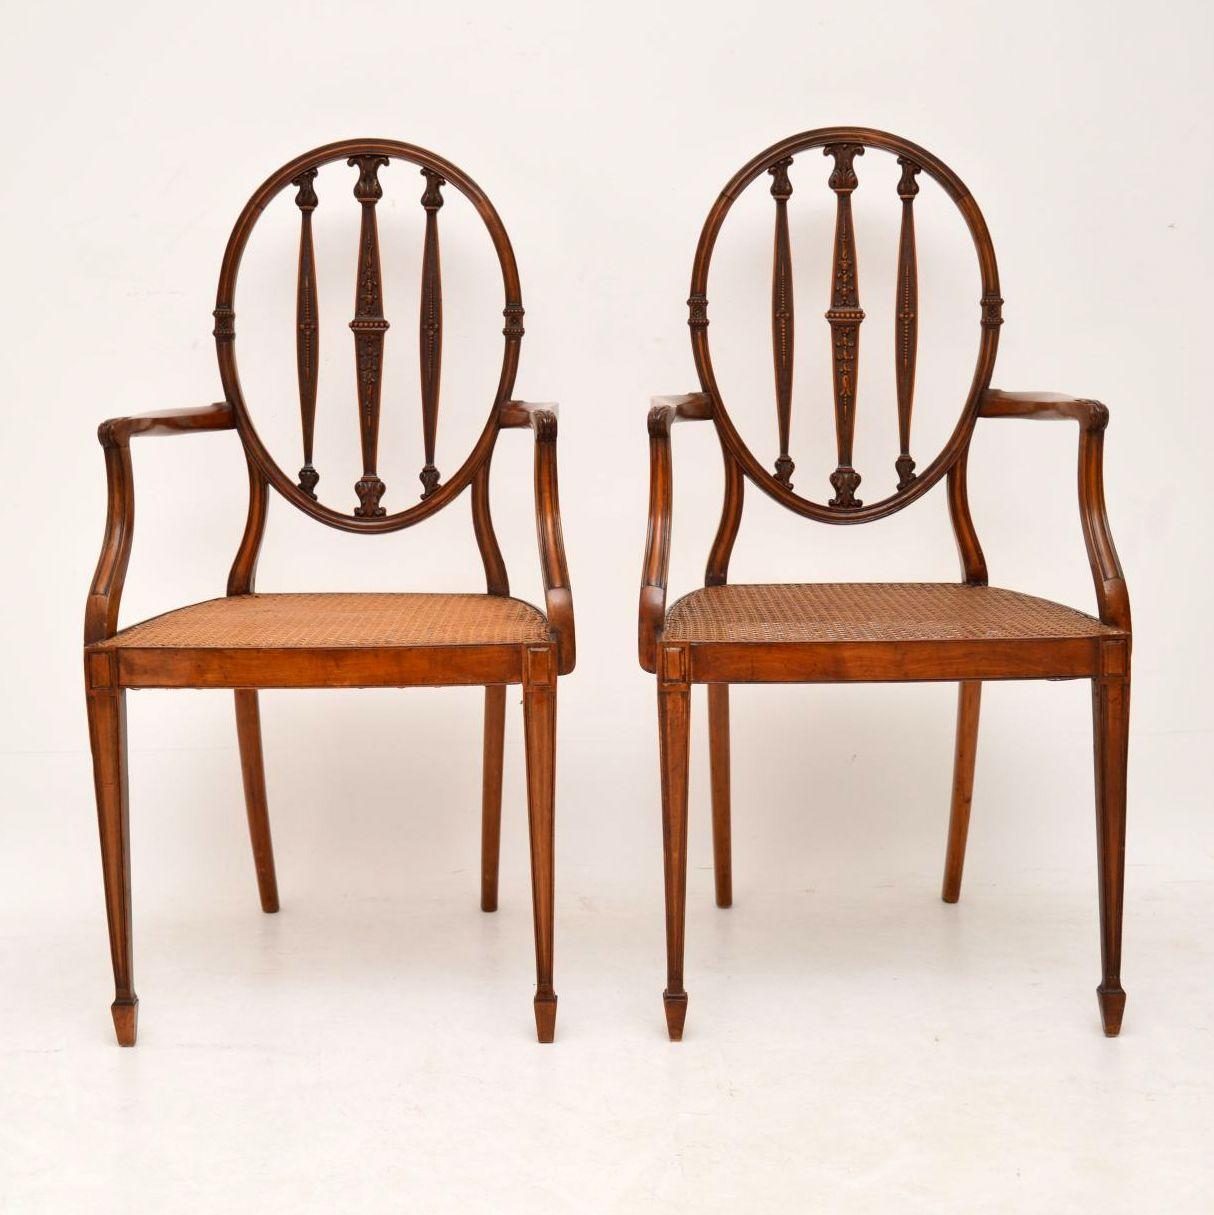 Very elegant and fine quality pair of antique Edwardian Satinwood armchairs of Sheraton design, dating from the 1900-1910 period and in excellent condition. They have oval backs, with intricately carved upright bars & cane seats that are also in